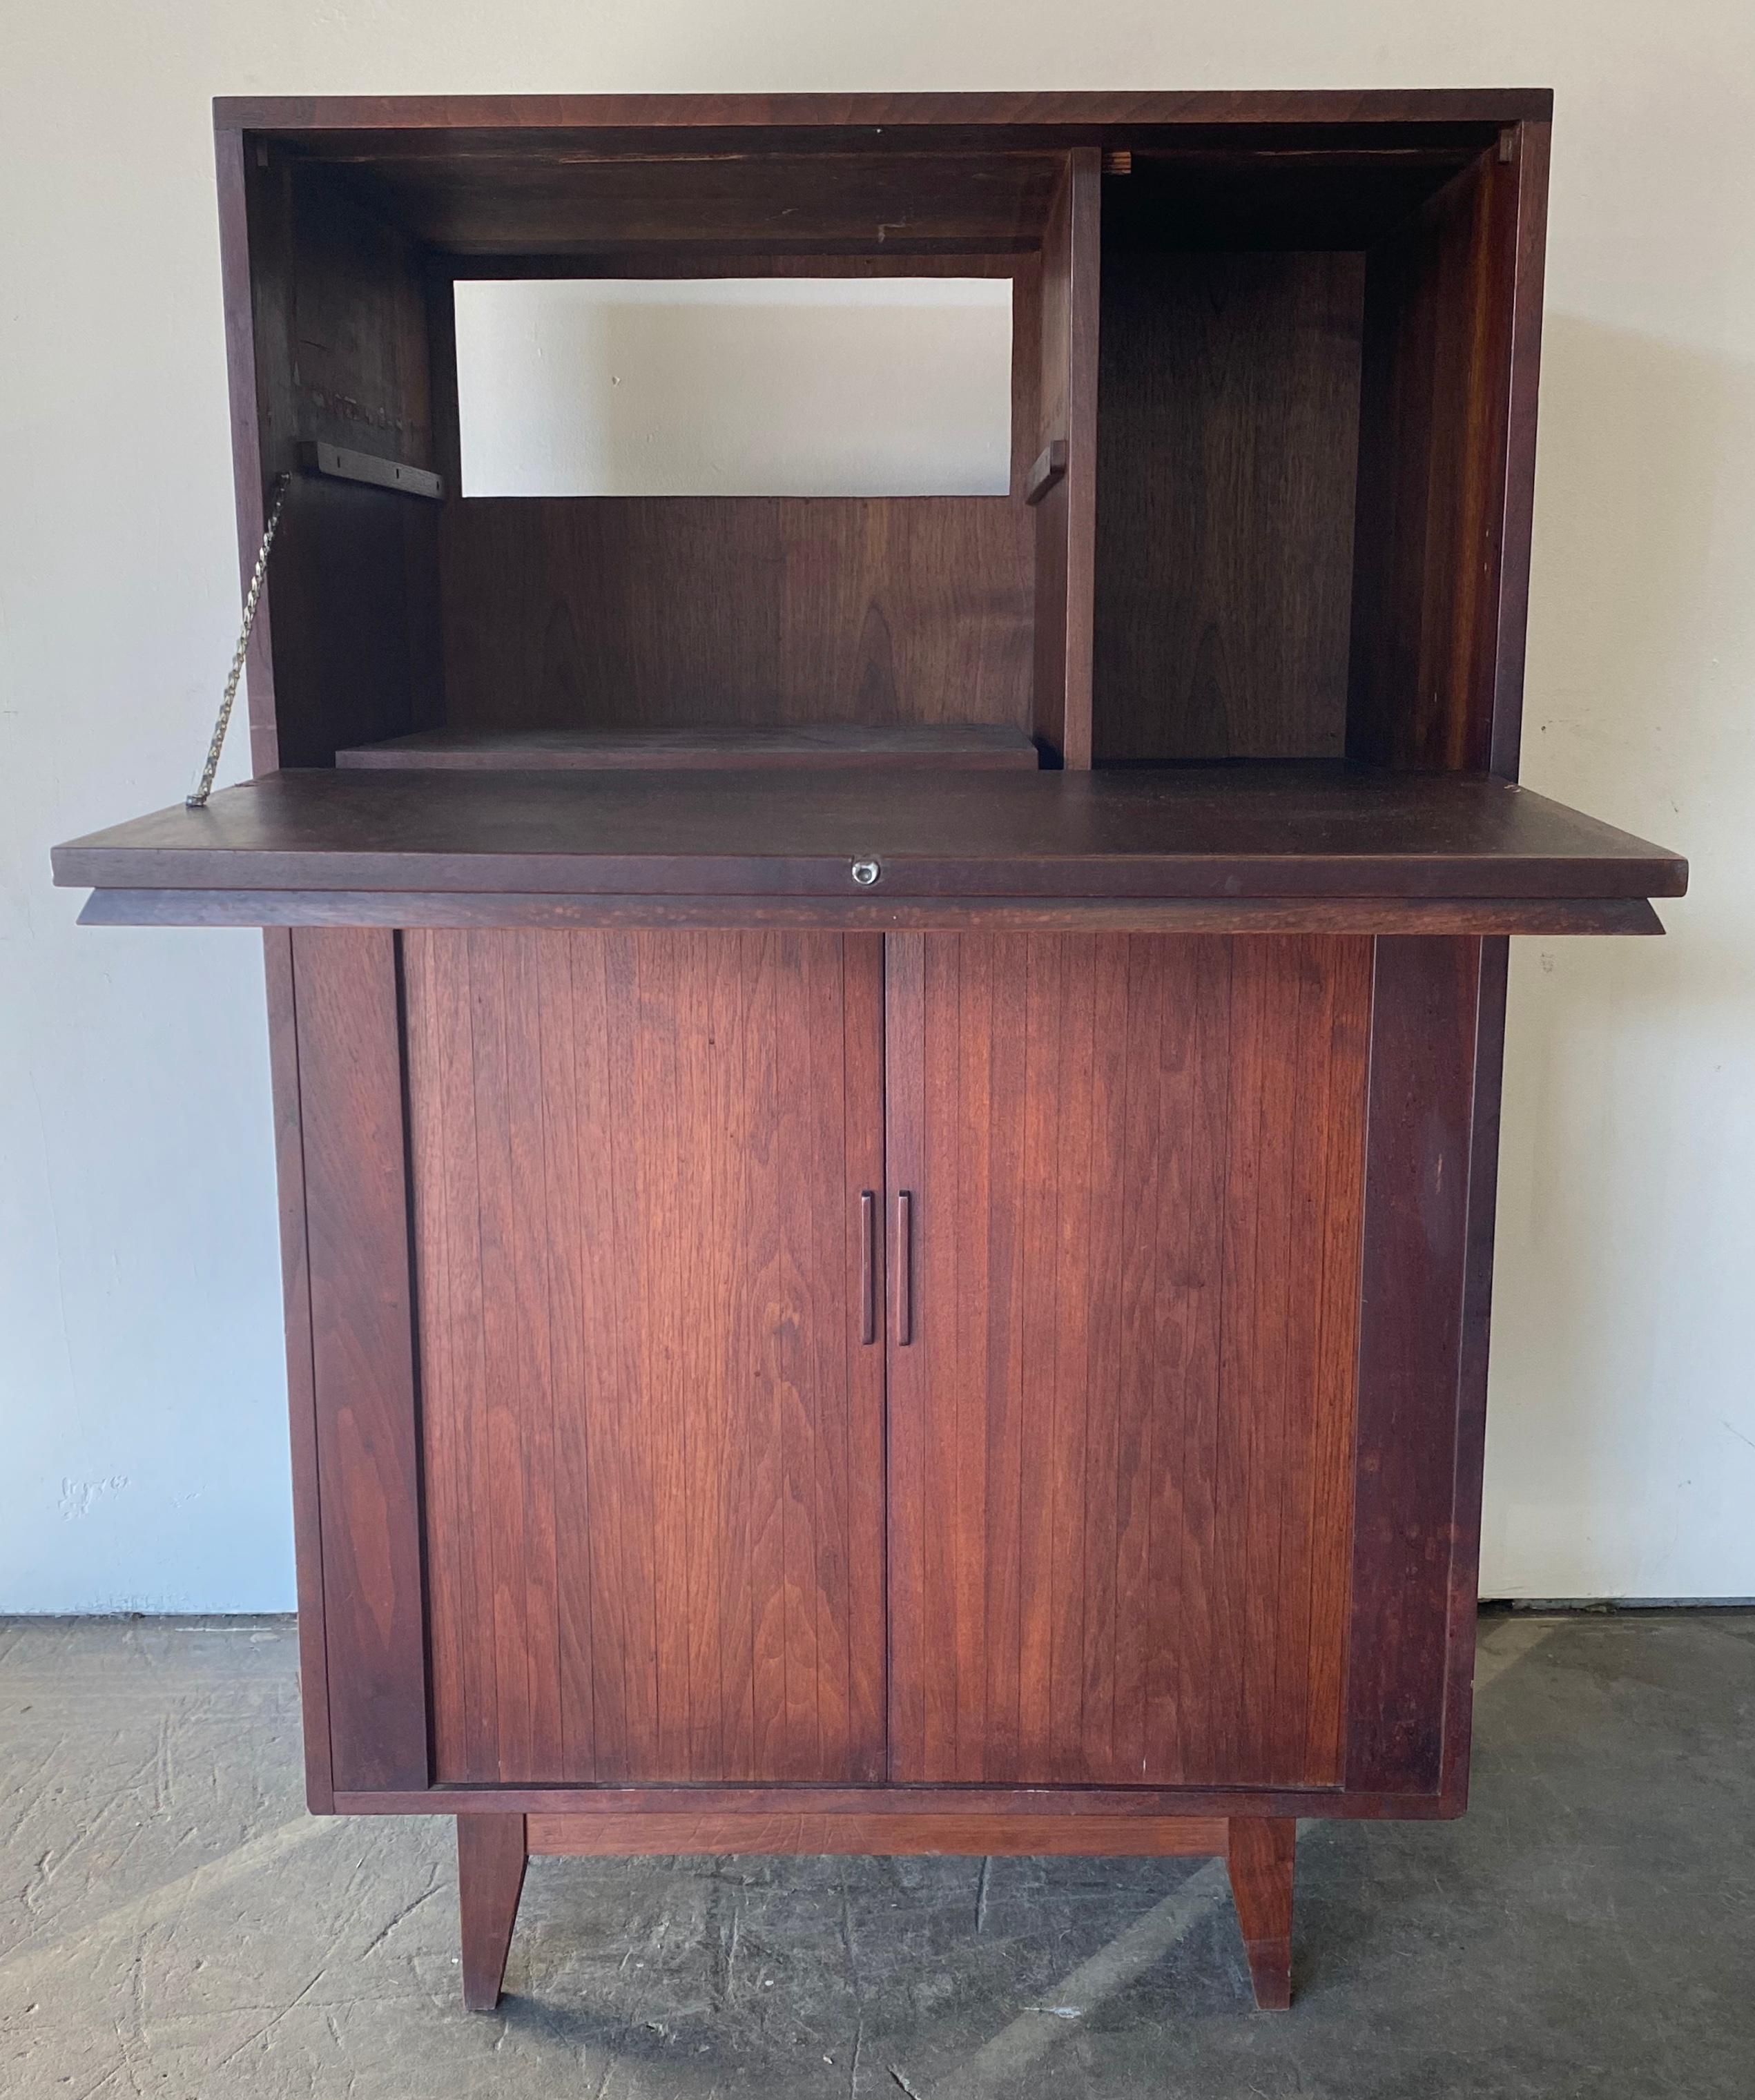 Custom built bar cabinet. Dates to the 1960s. Purchased from the original owner who used it in Greenwich Village and then Greenwich, CT. Crafted from American black walnut with spectacular grain texture and color. Features generously sized to